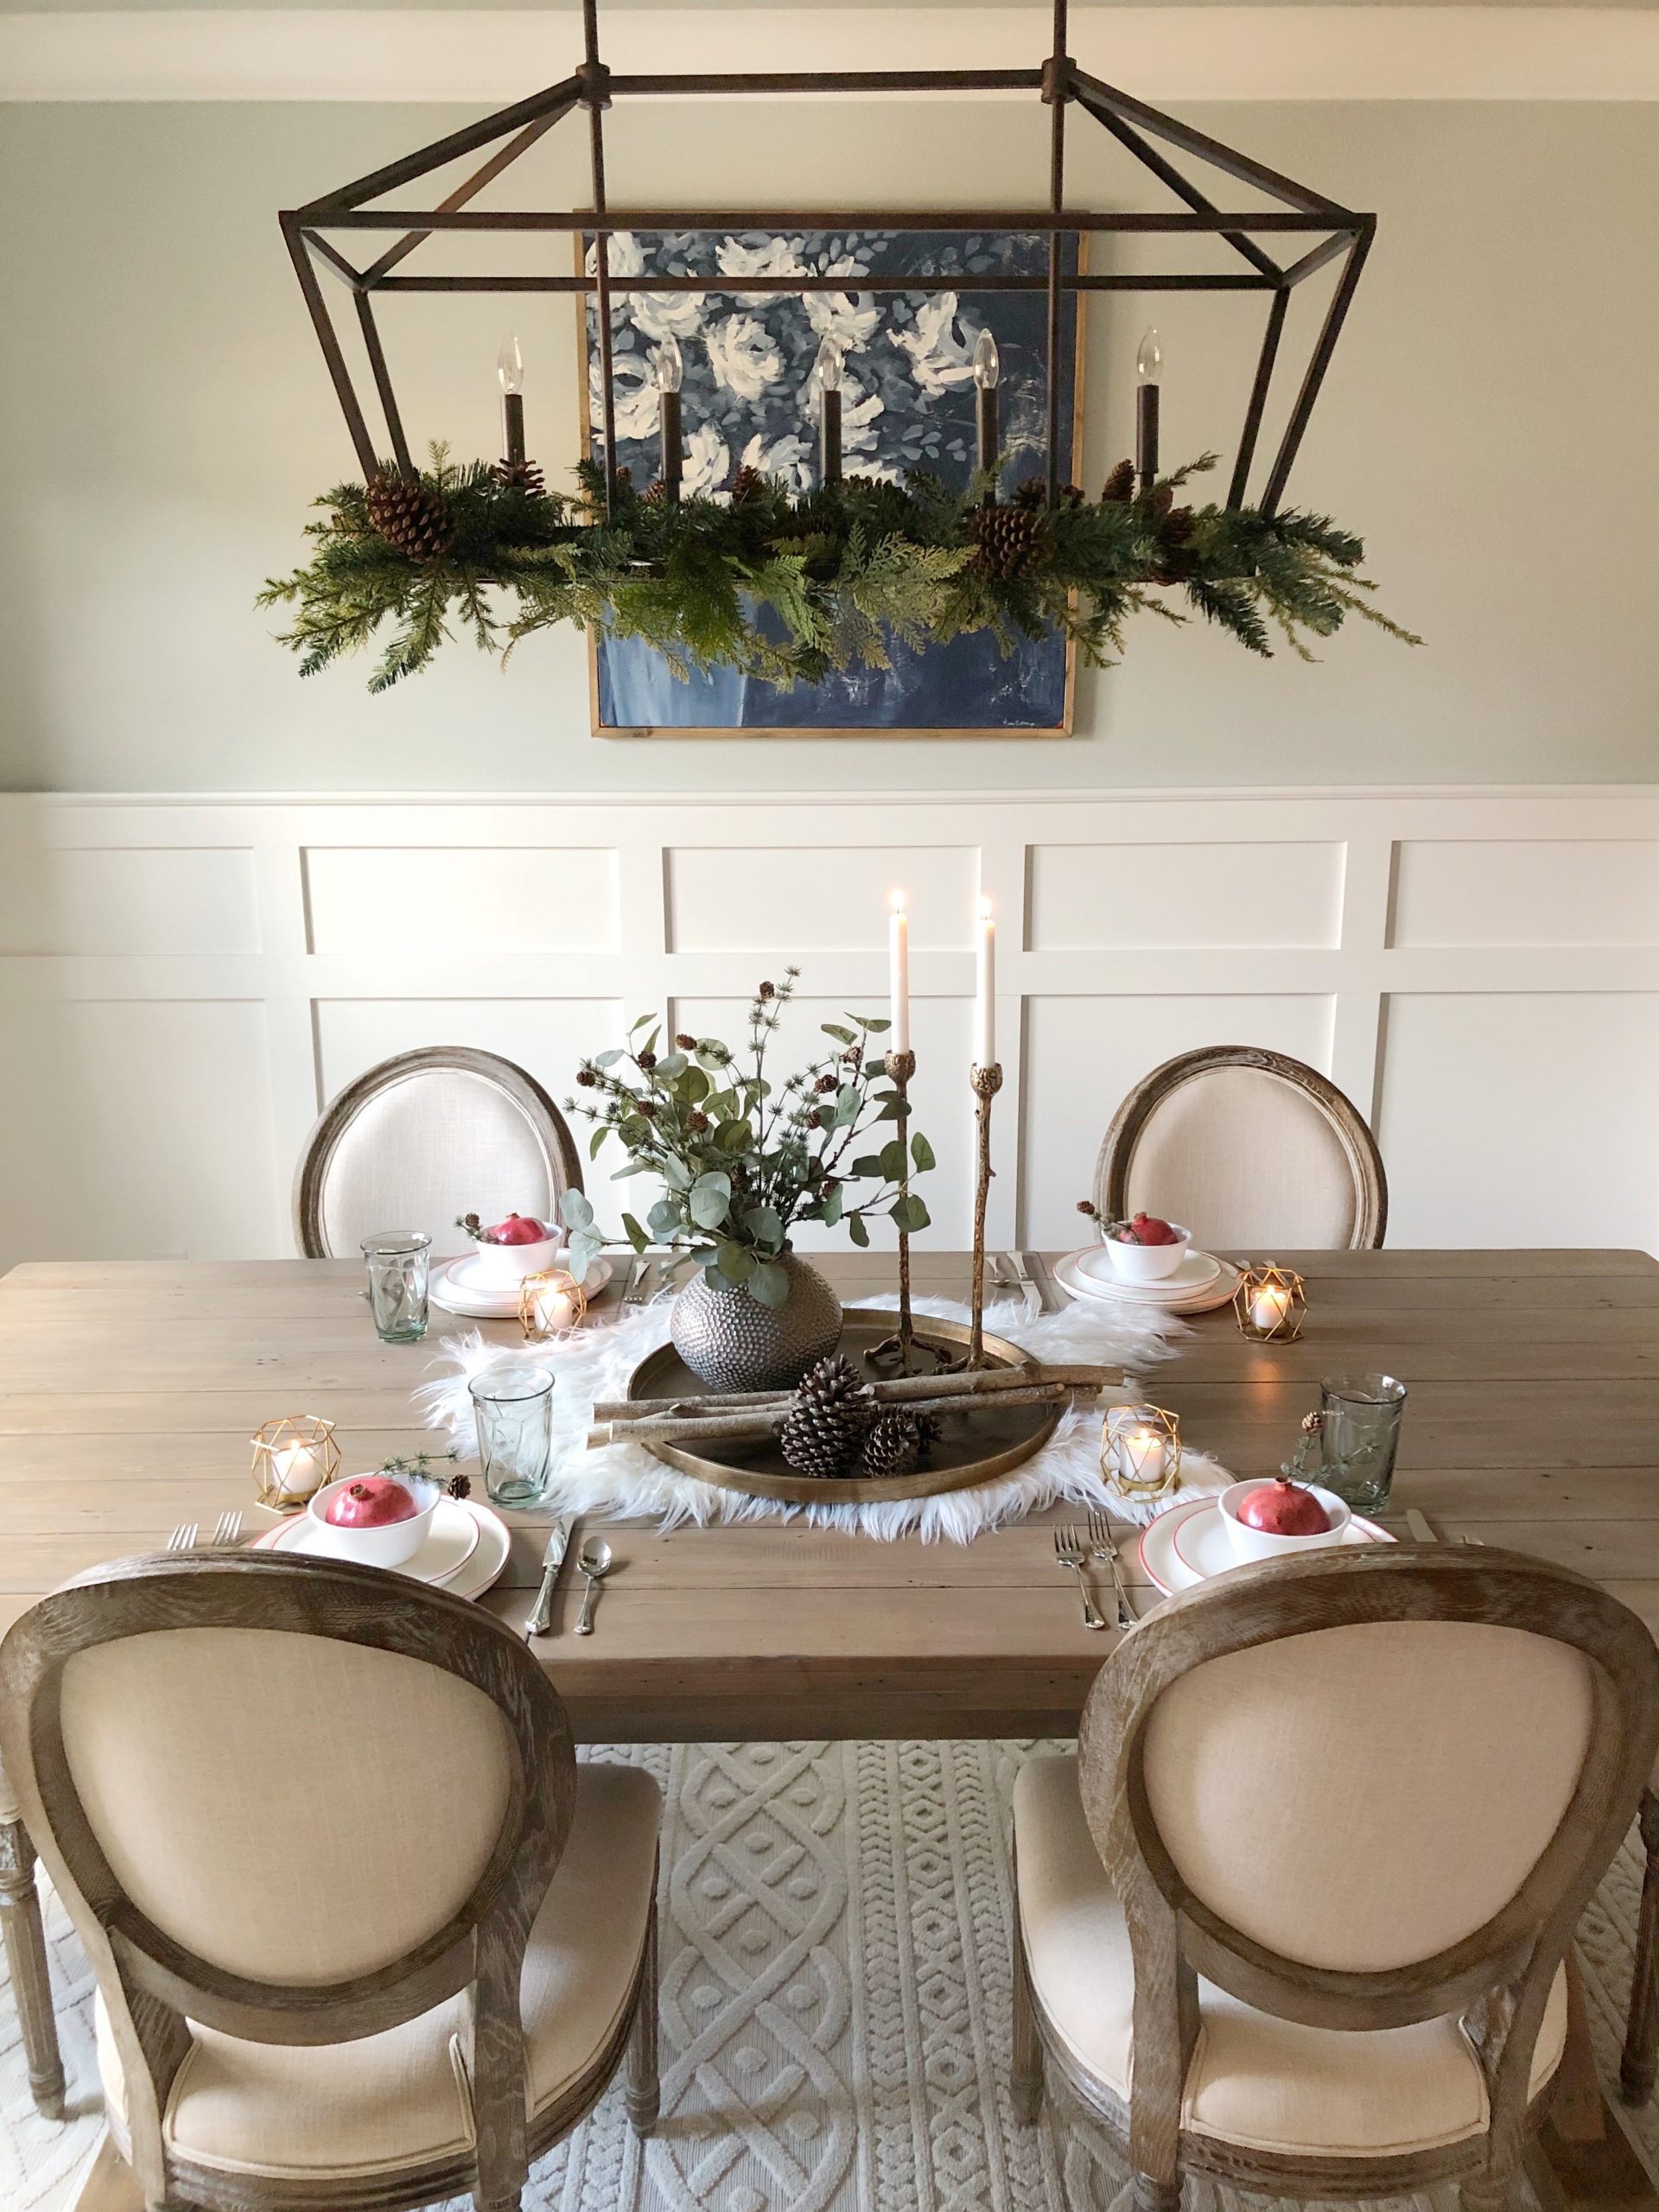 Styled Table for the Holidays from Walmart Home - Our Vintage Nest